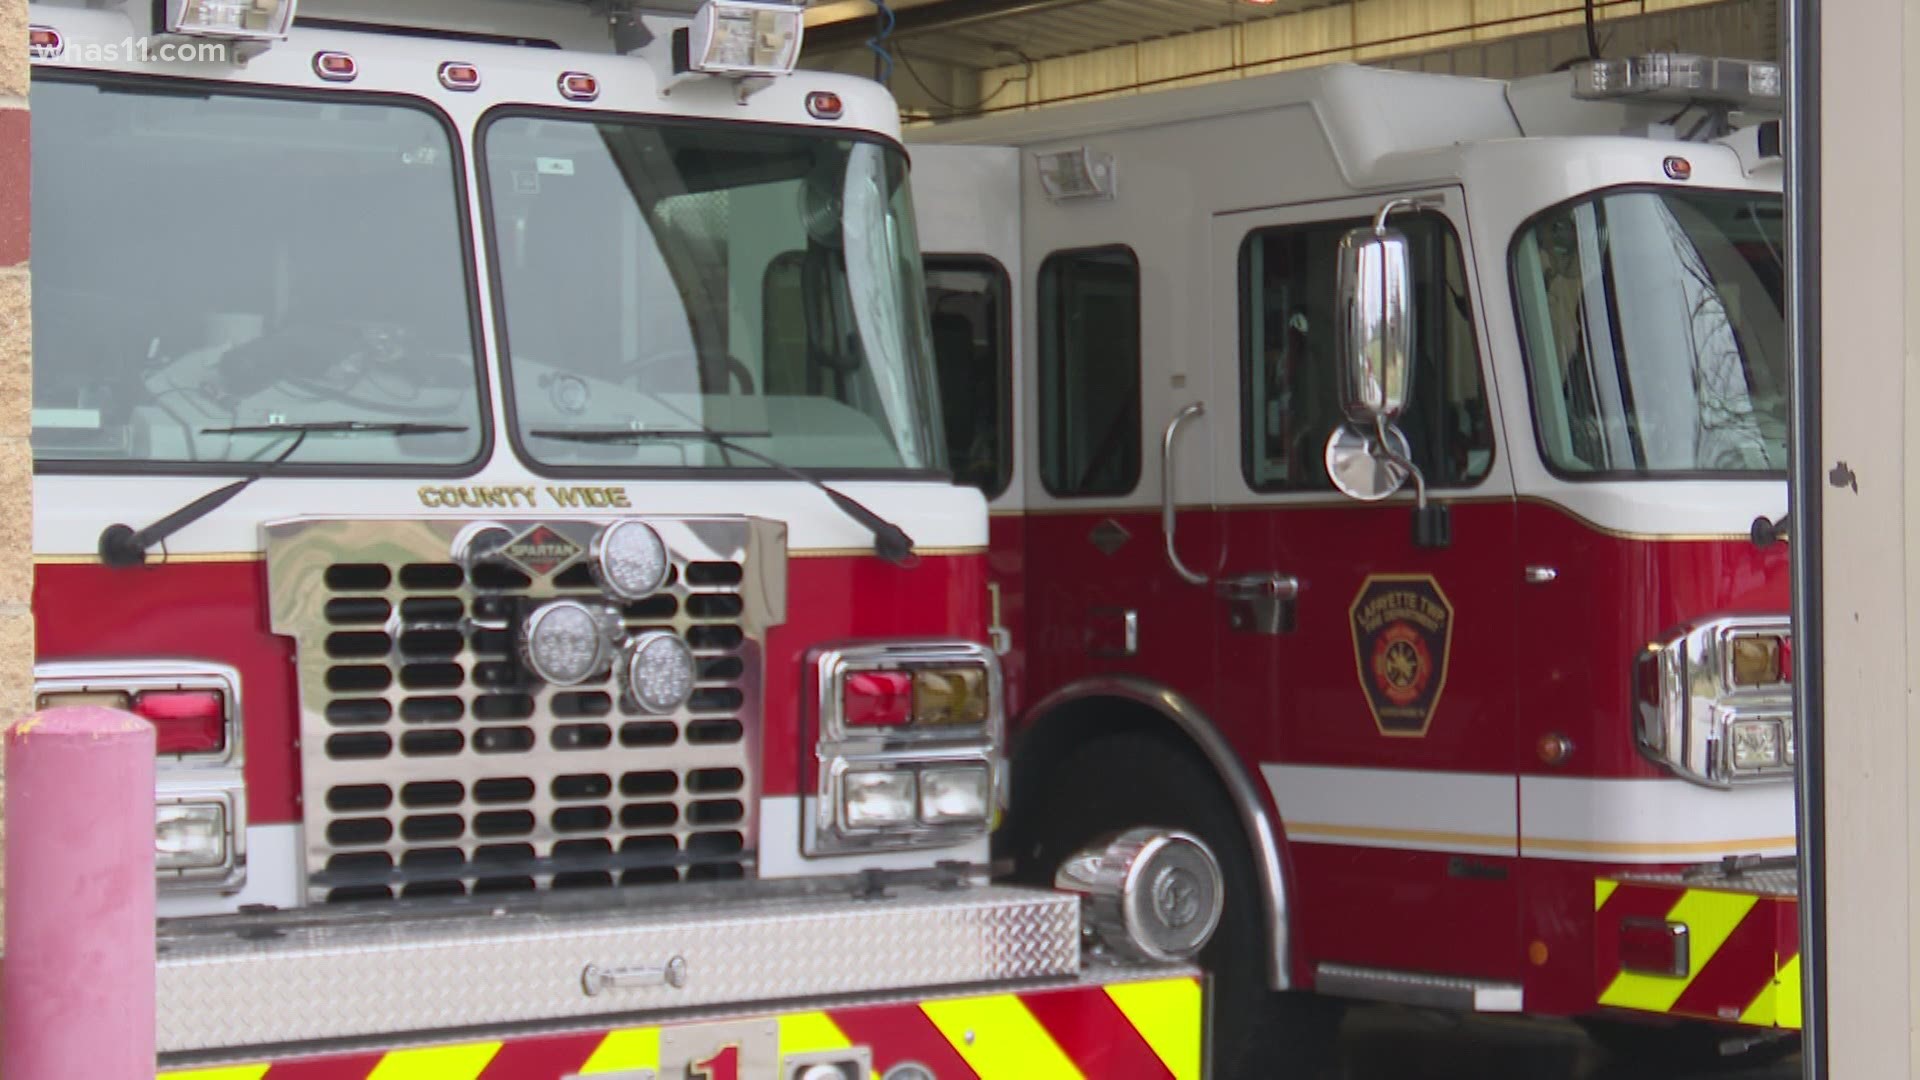 The Floyd County commissioners are considering merging four fire districts: LaFayette, Georgetown, Greenville and Franklin.